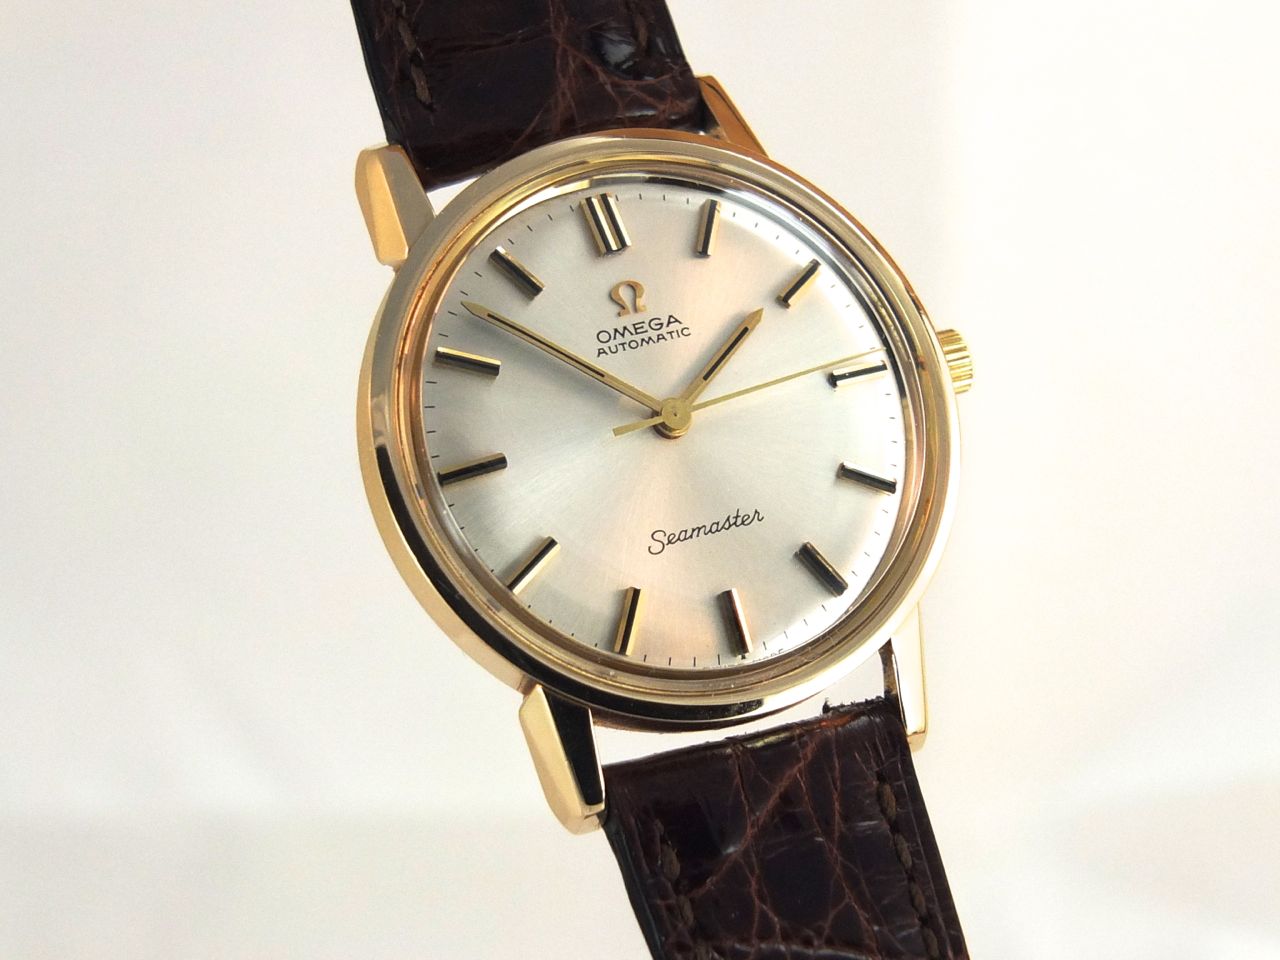 Omega Seamaster Automatic 9K 1965 | Vintage Gold Watches